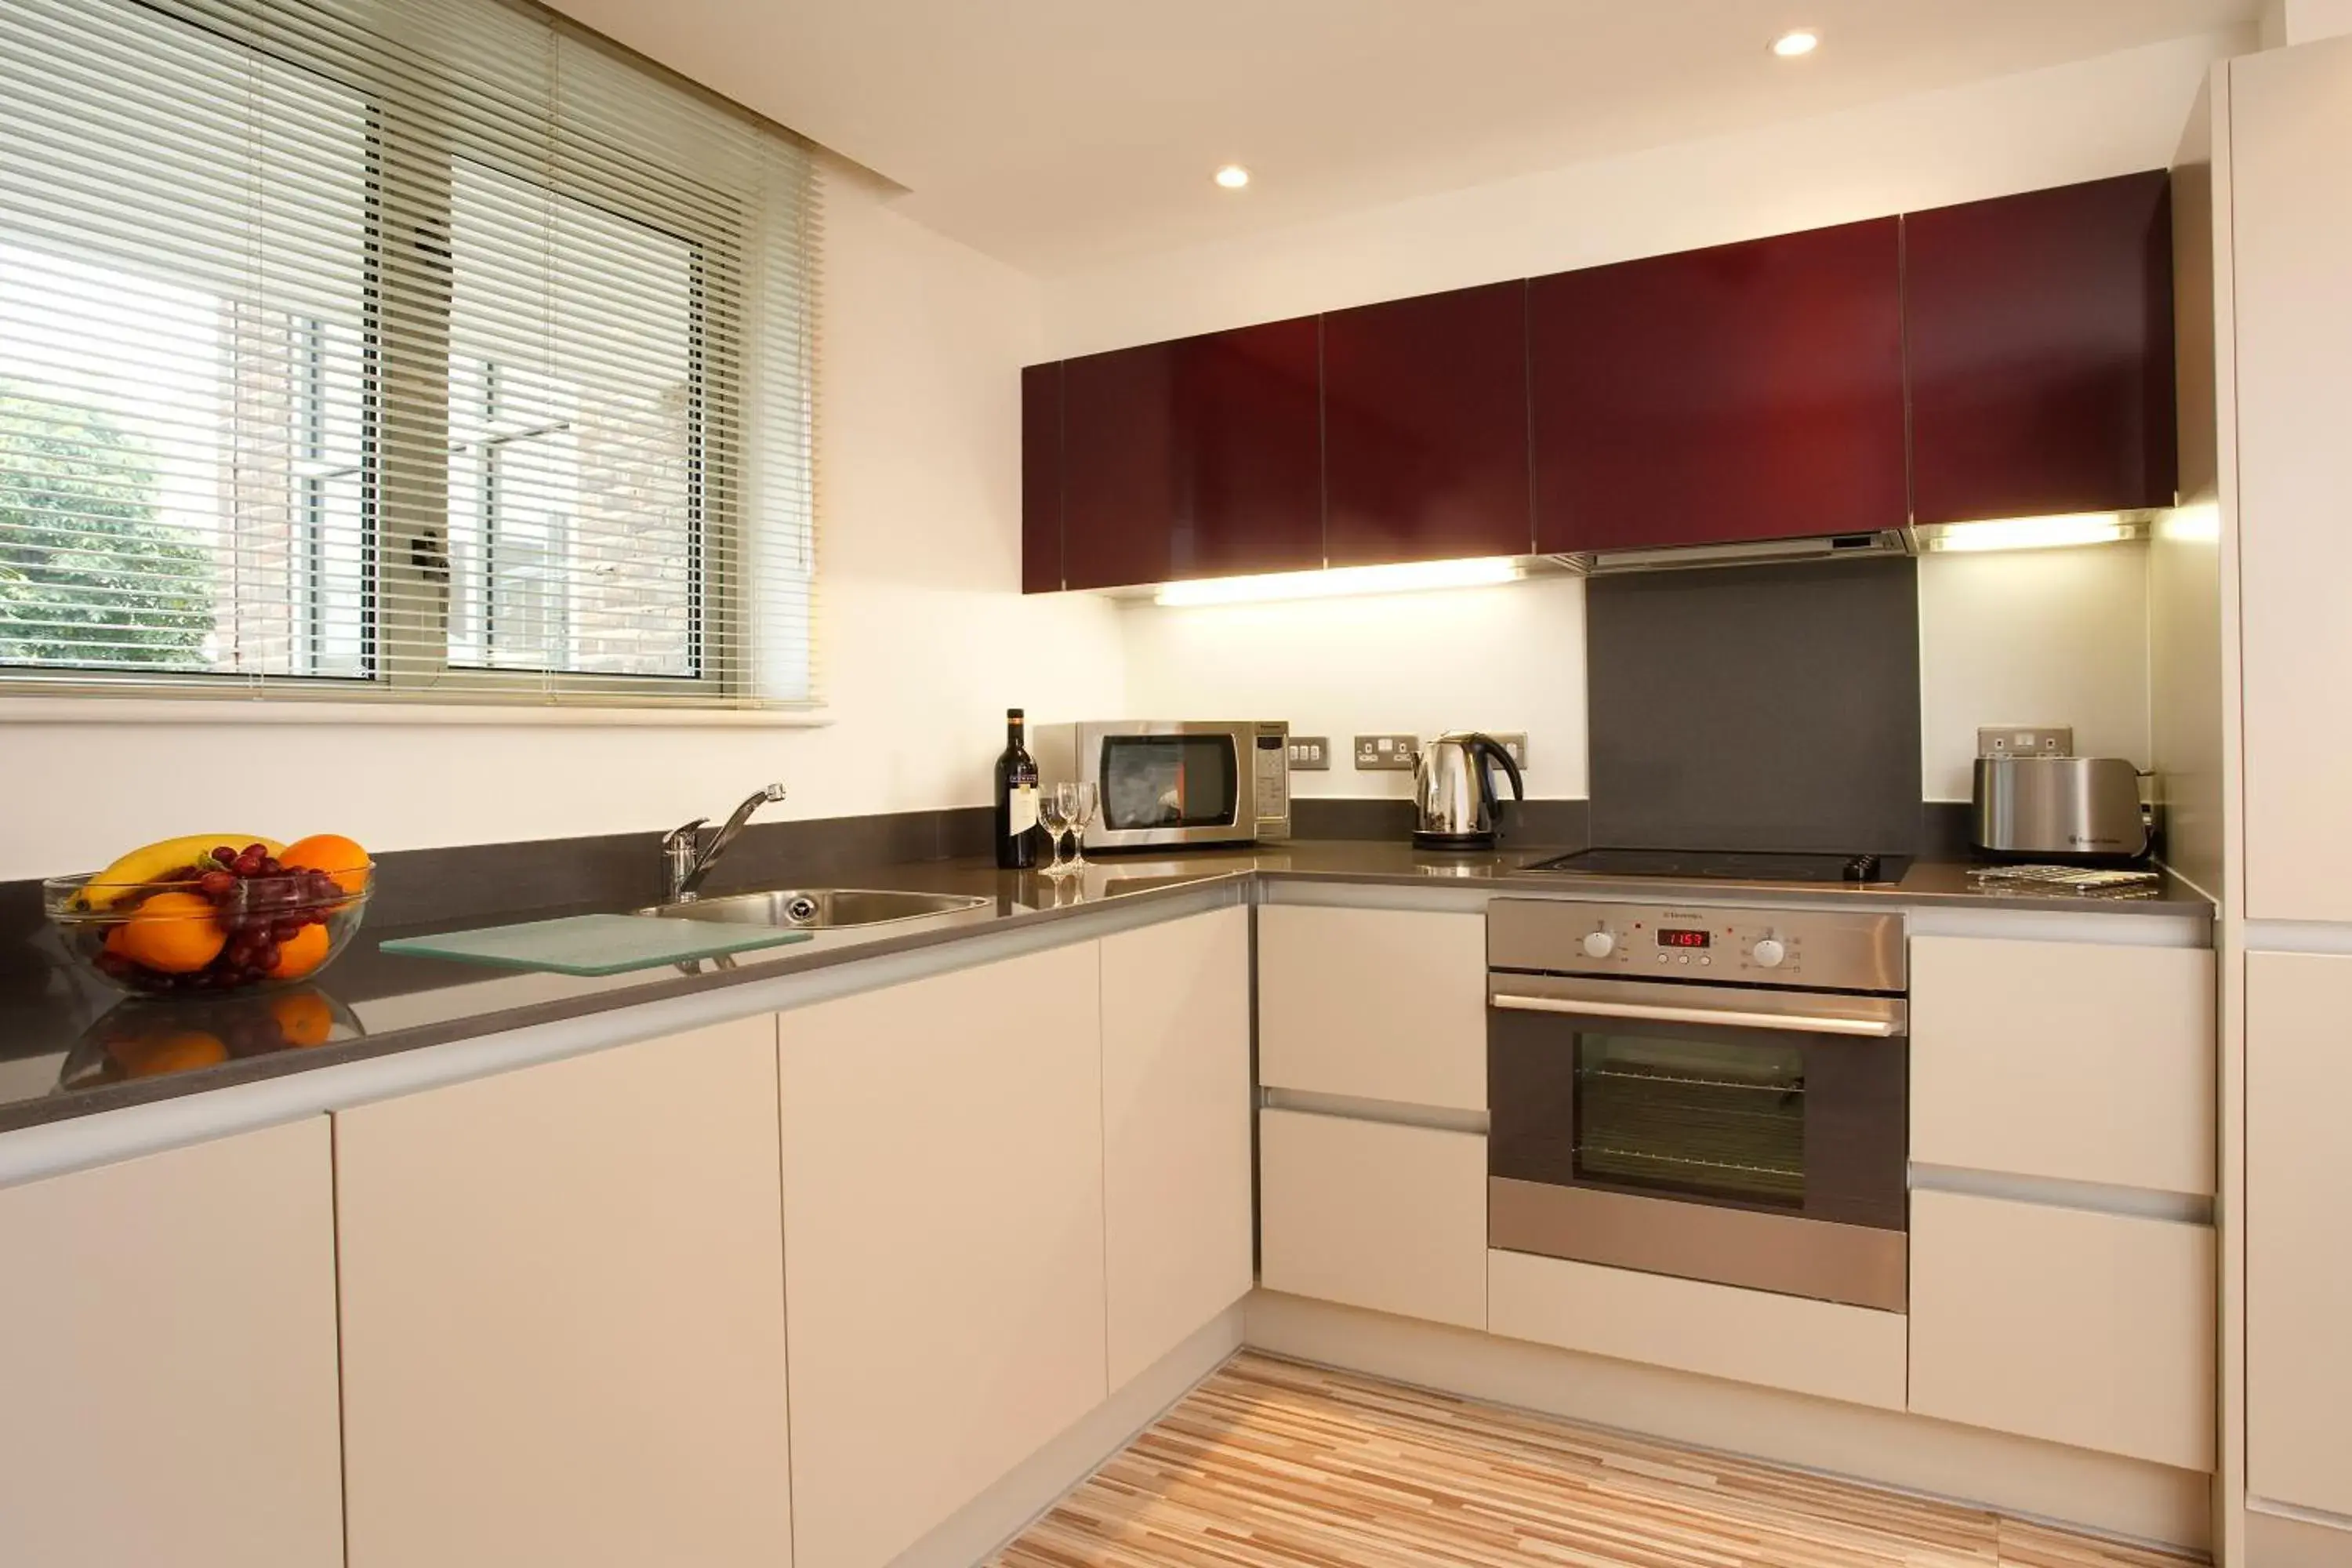 Two-Bedroom Apartment in SACO Holborn – Lamb’s Conduit St